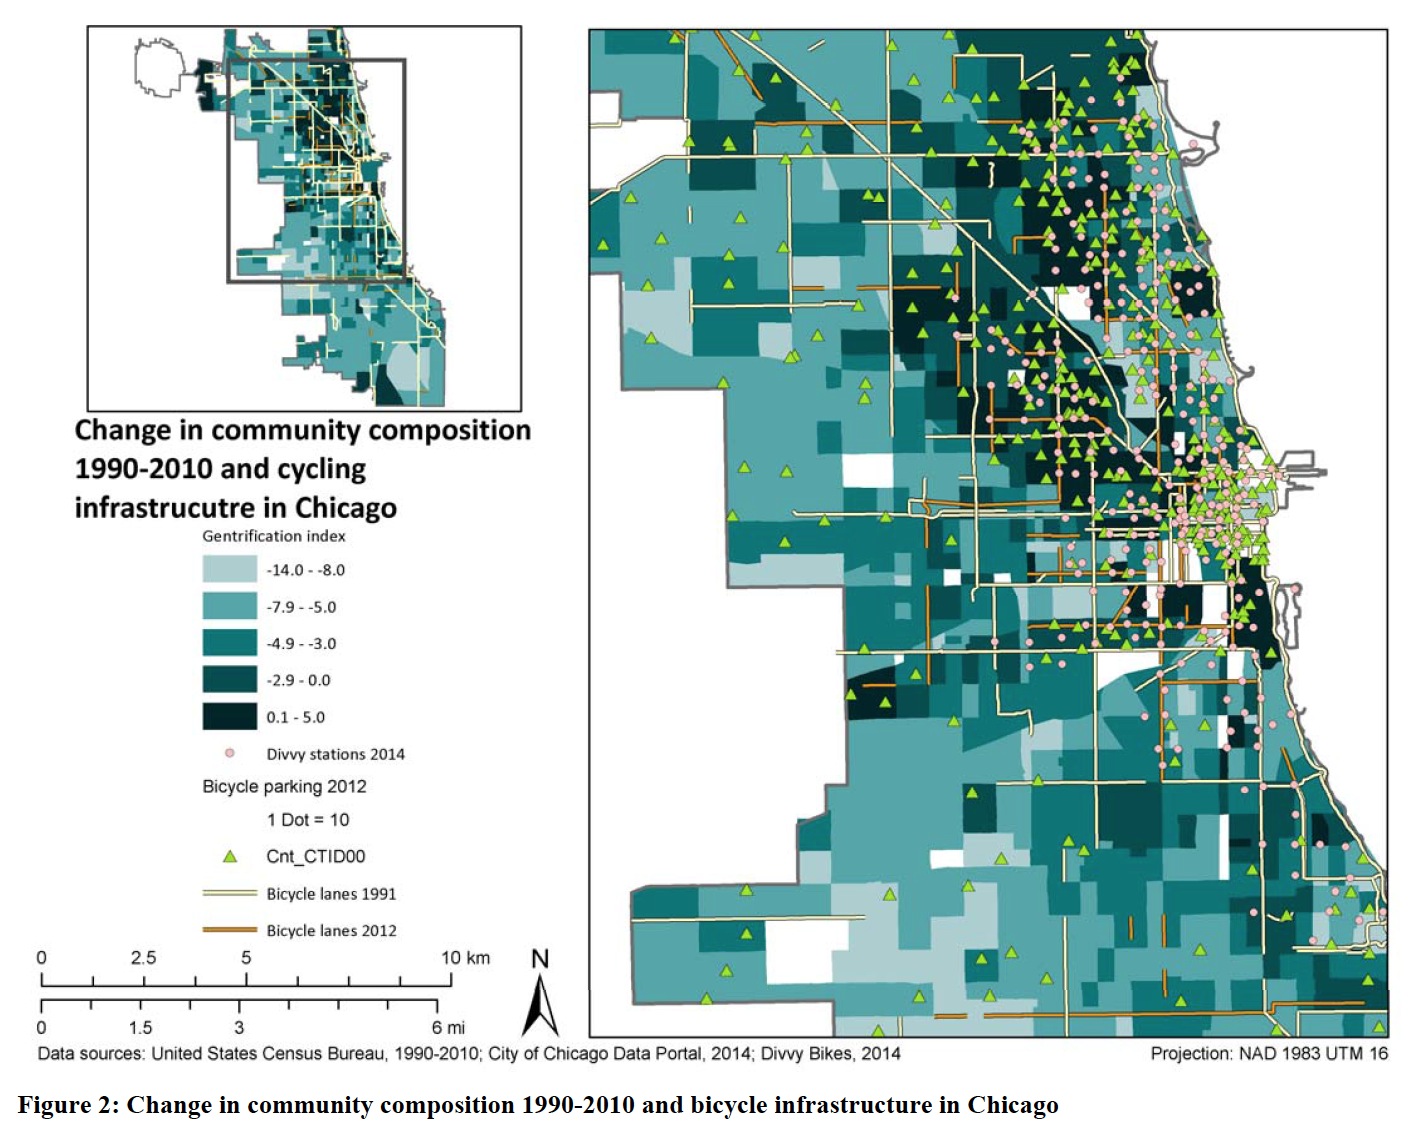 Figure 2: Change in community composition 1990-2010 and bicycle infrastructure in Chicago